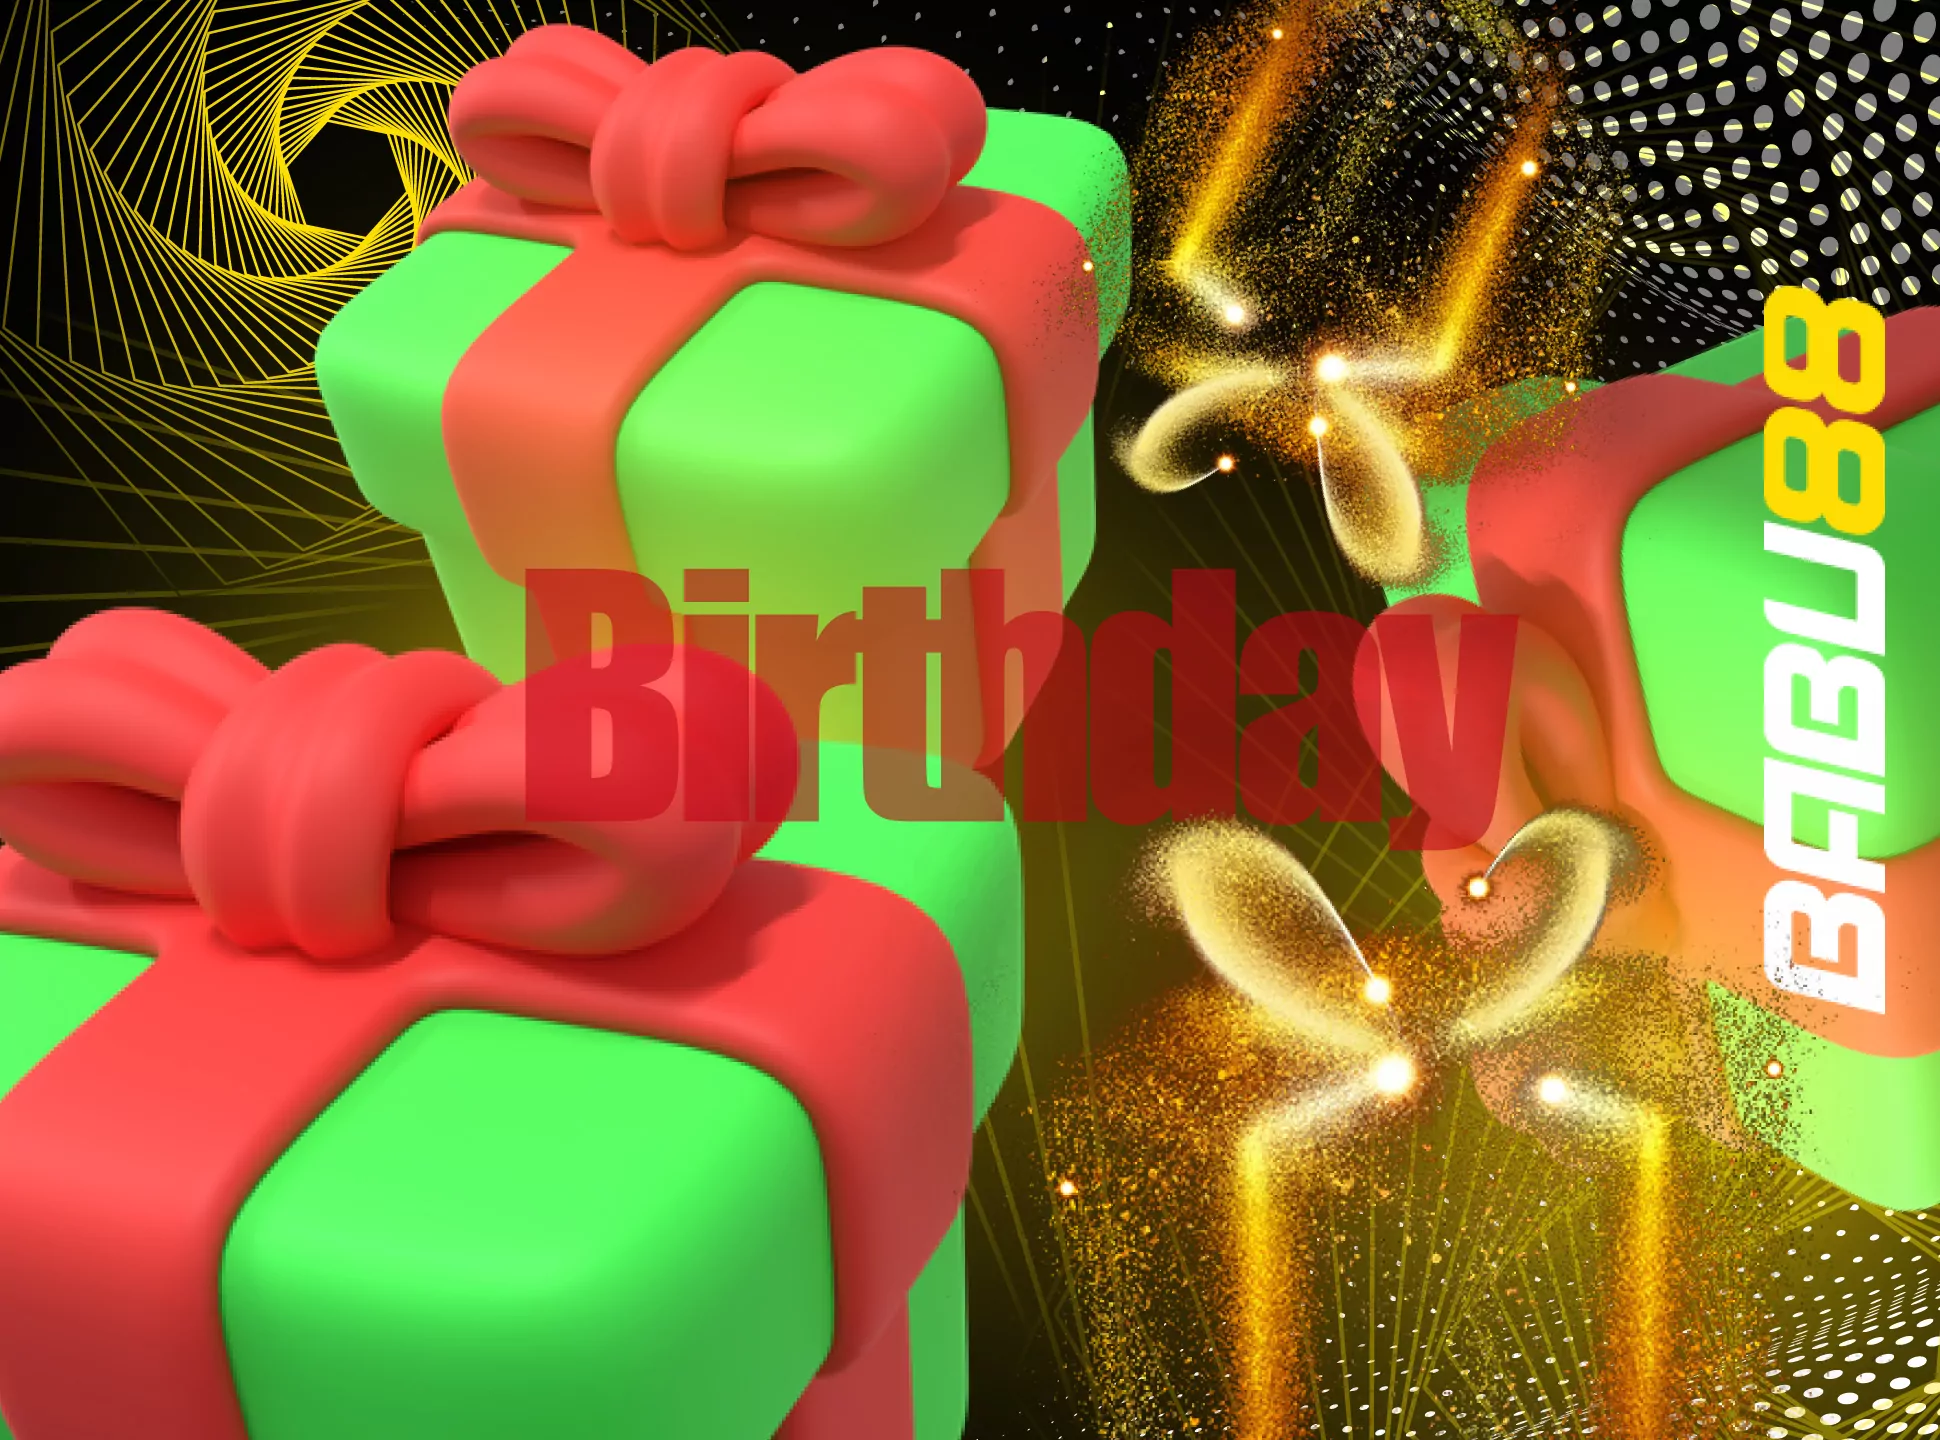 Receive an extra bonus on your birtday from Babu88.